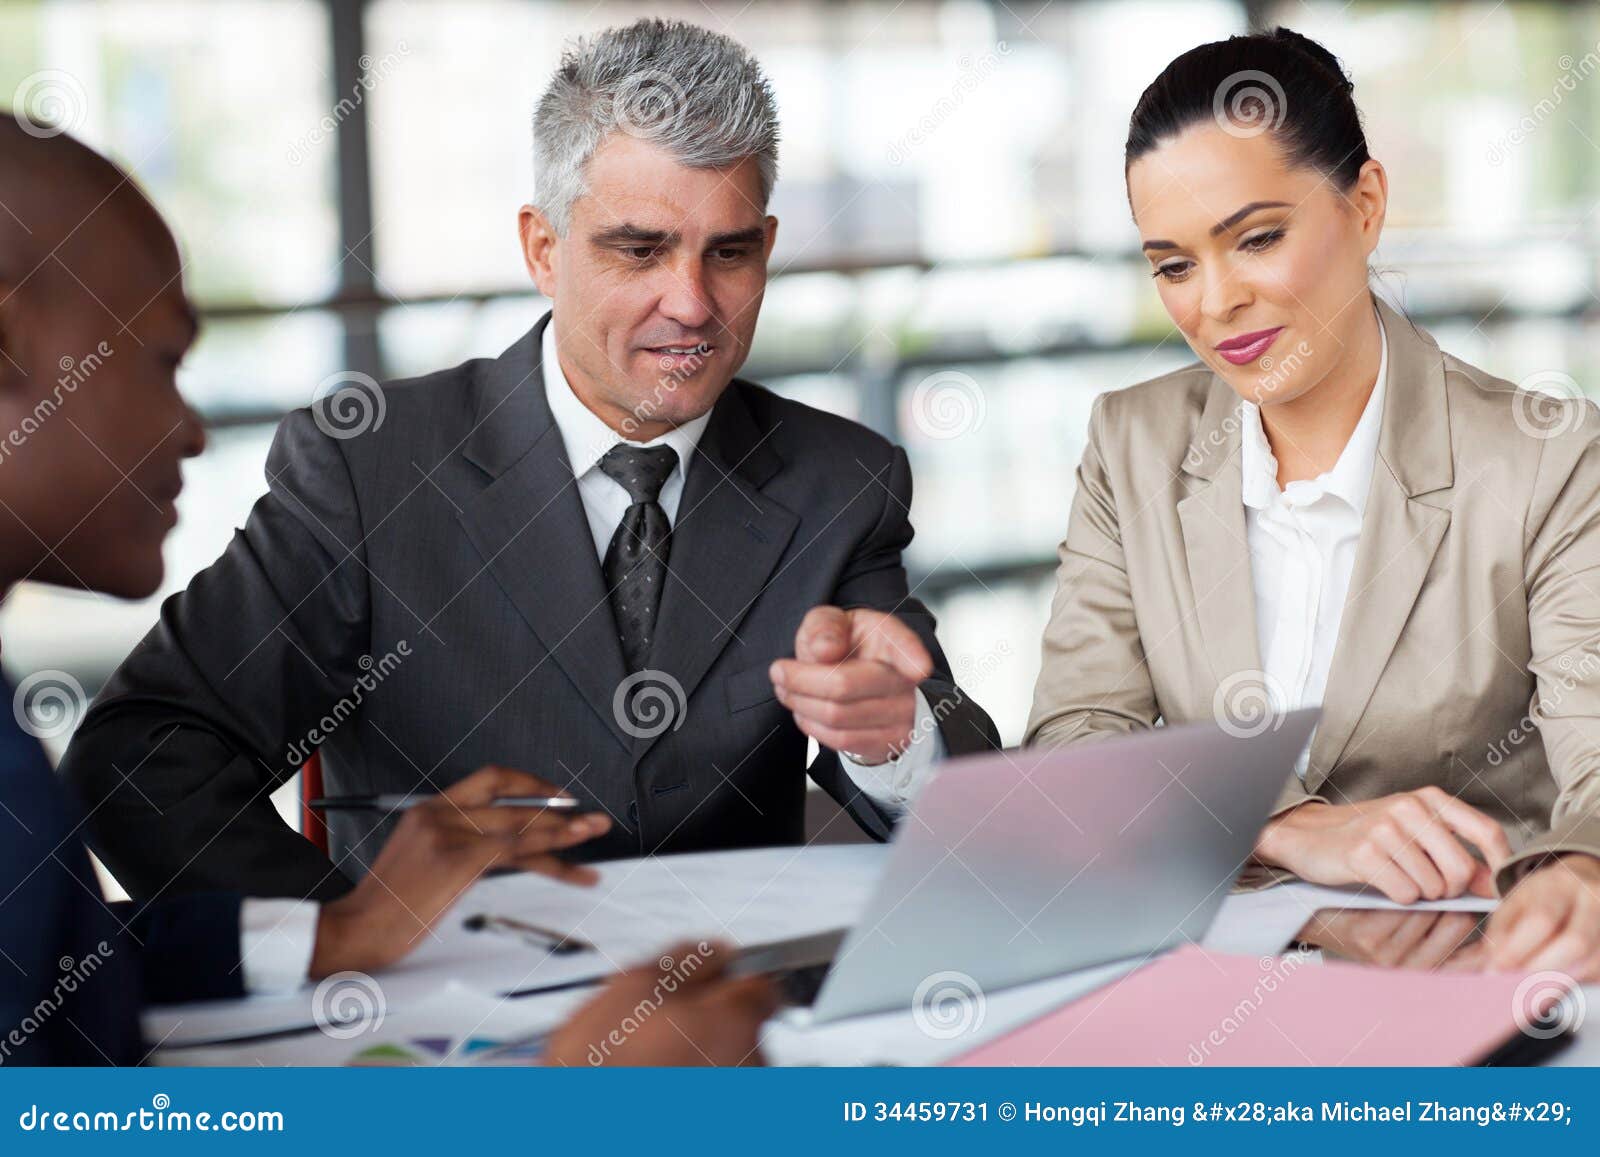 business planning work images